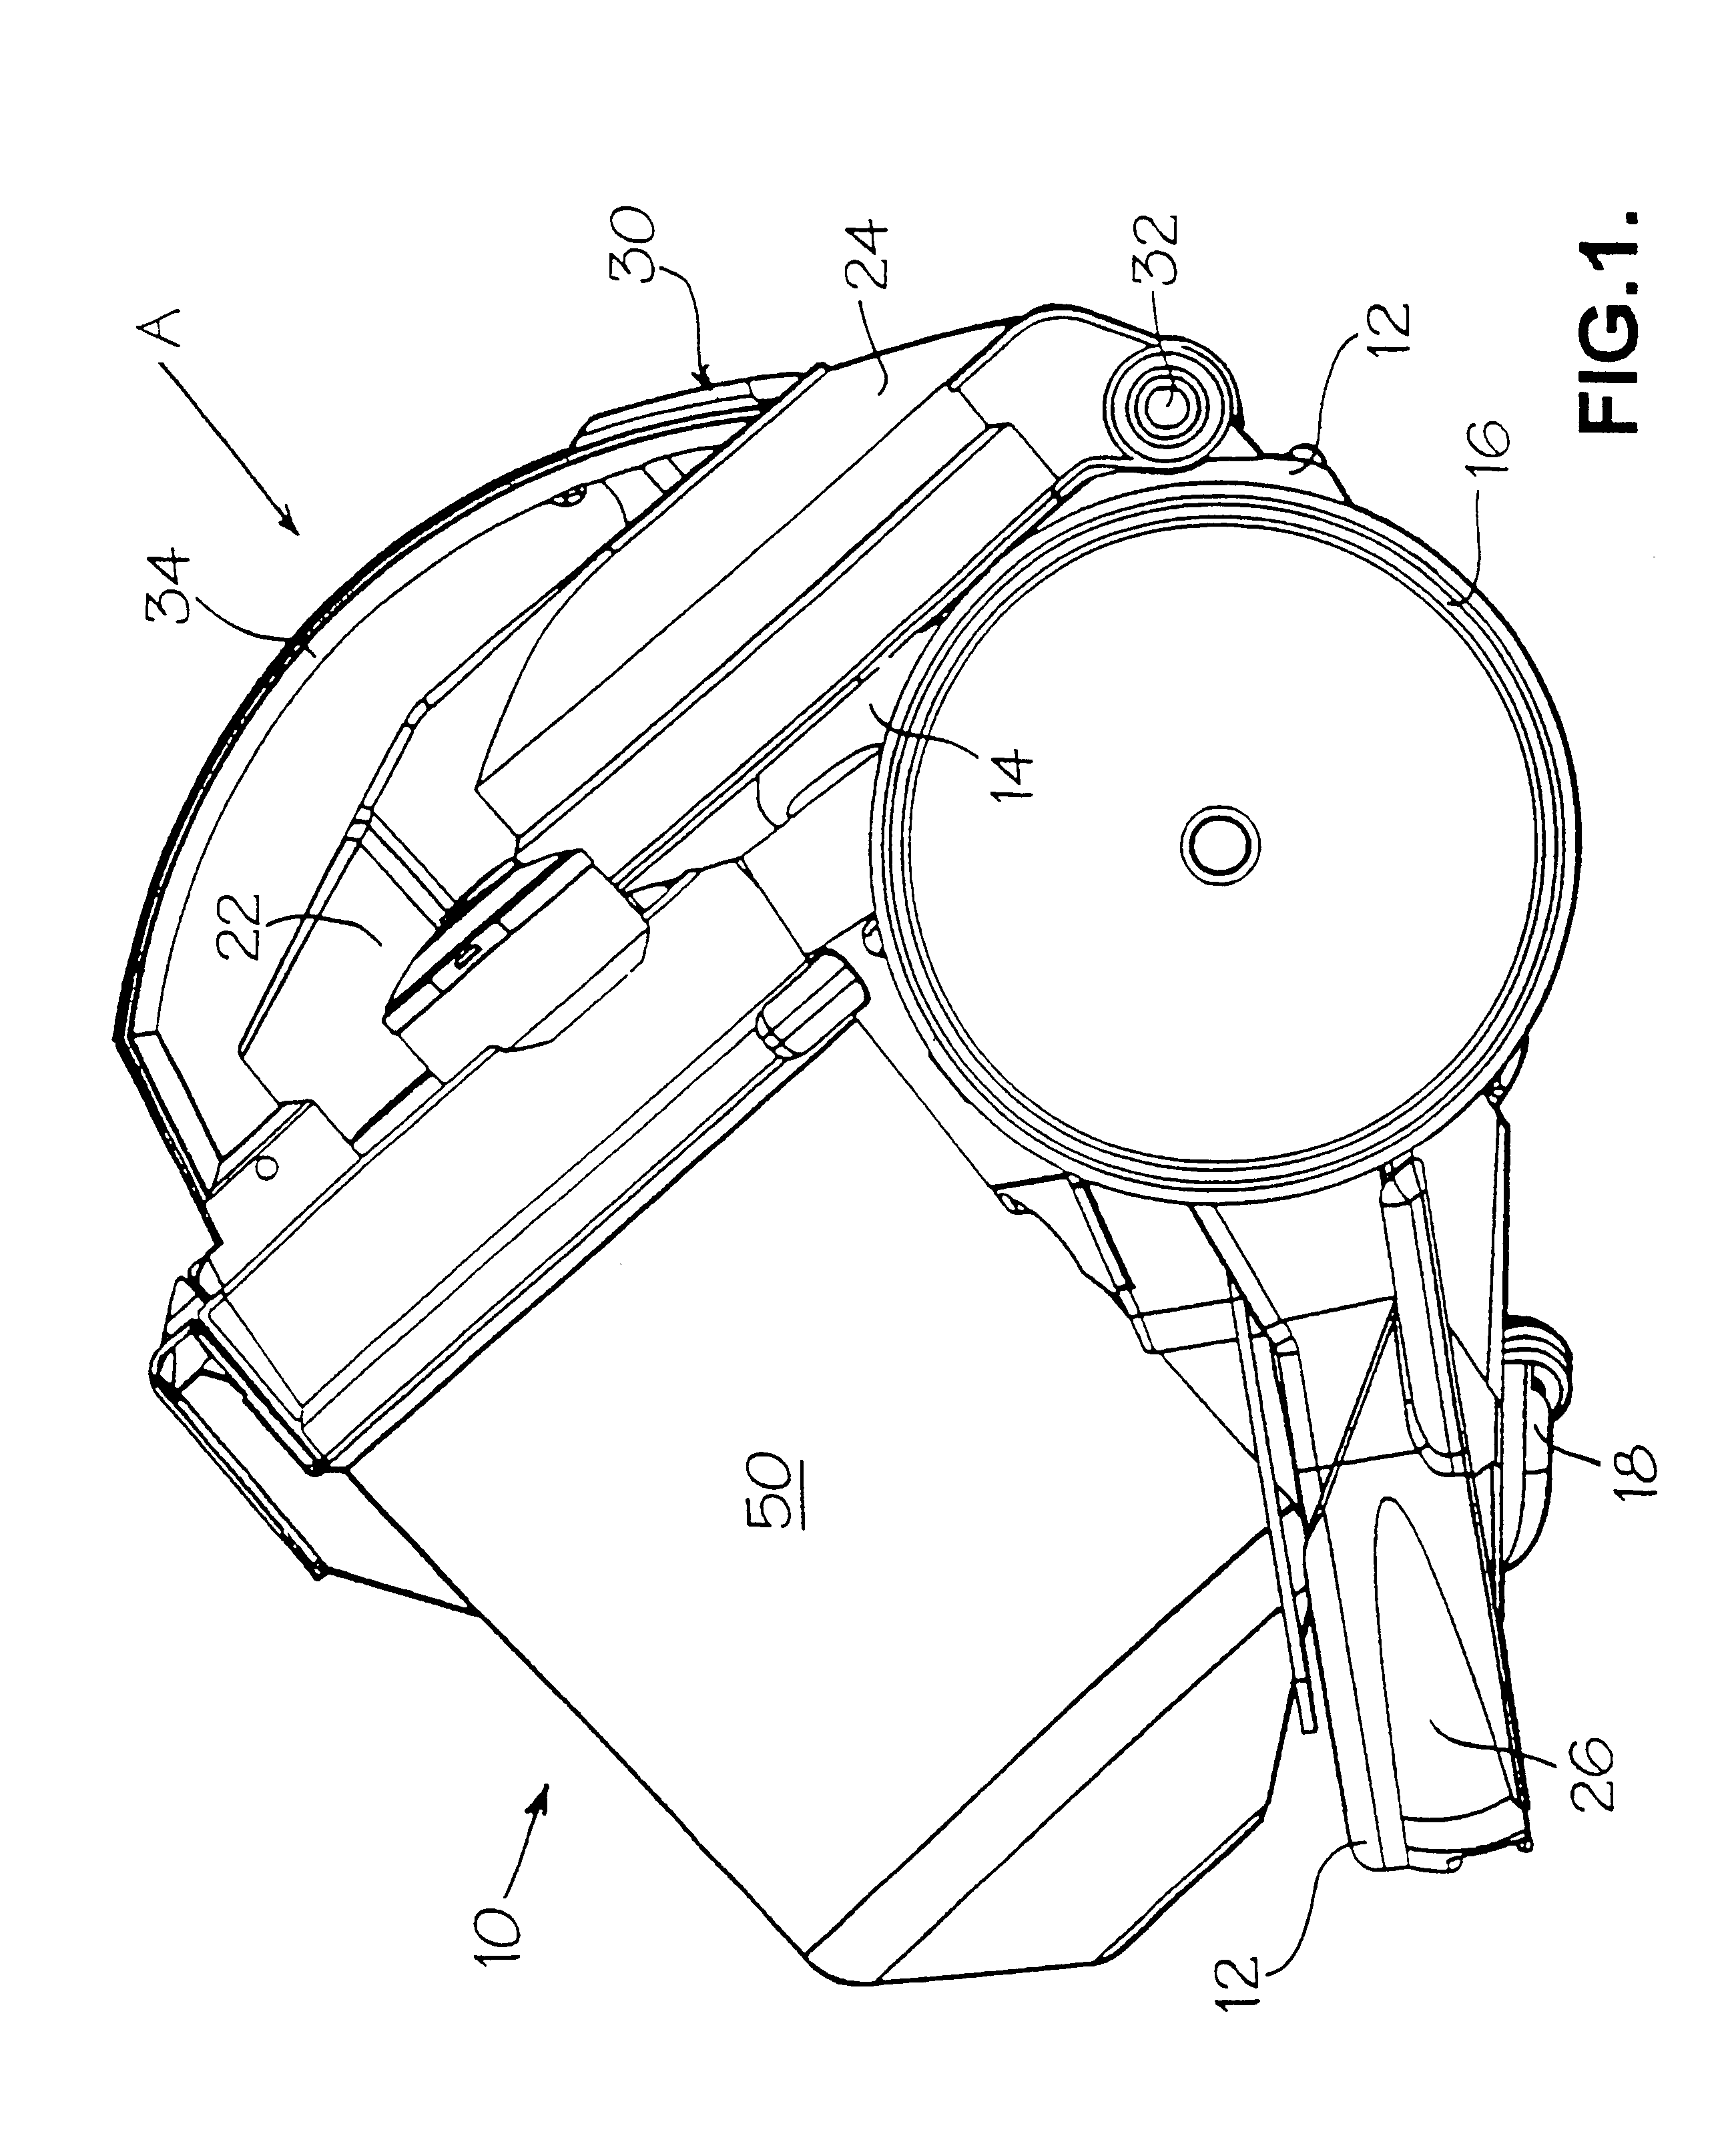 Cyclonic separating apparatus with tangential offtake conduit